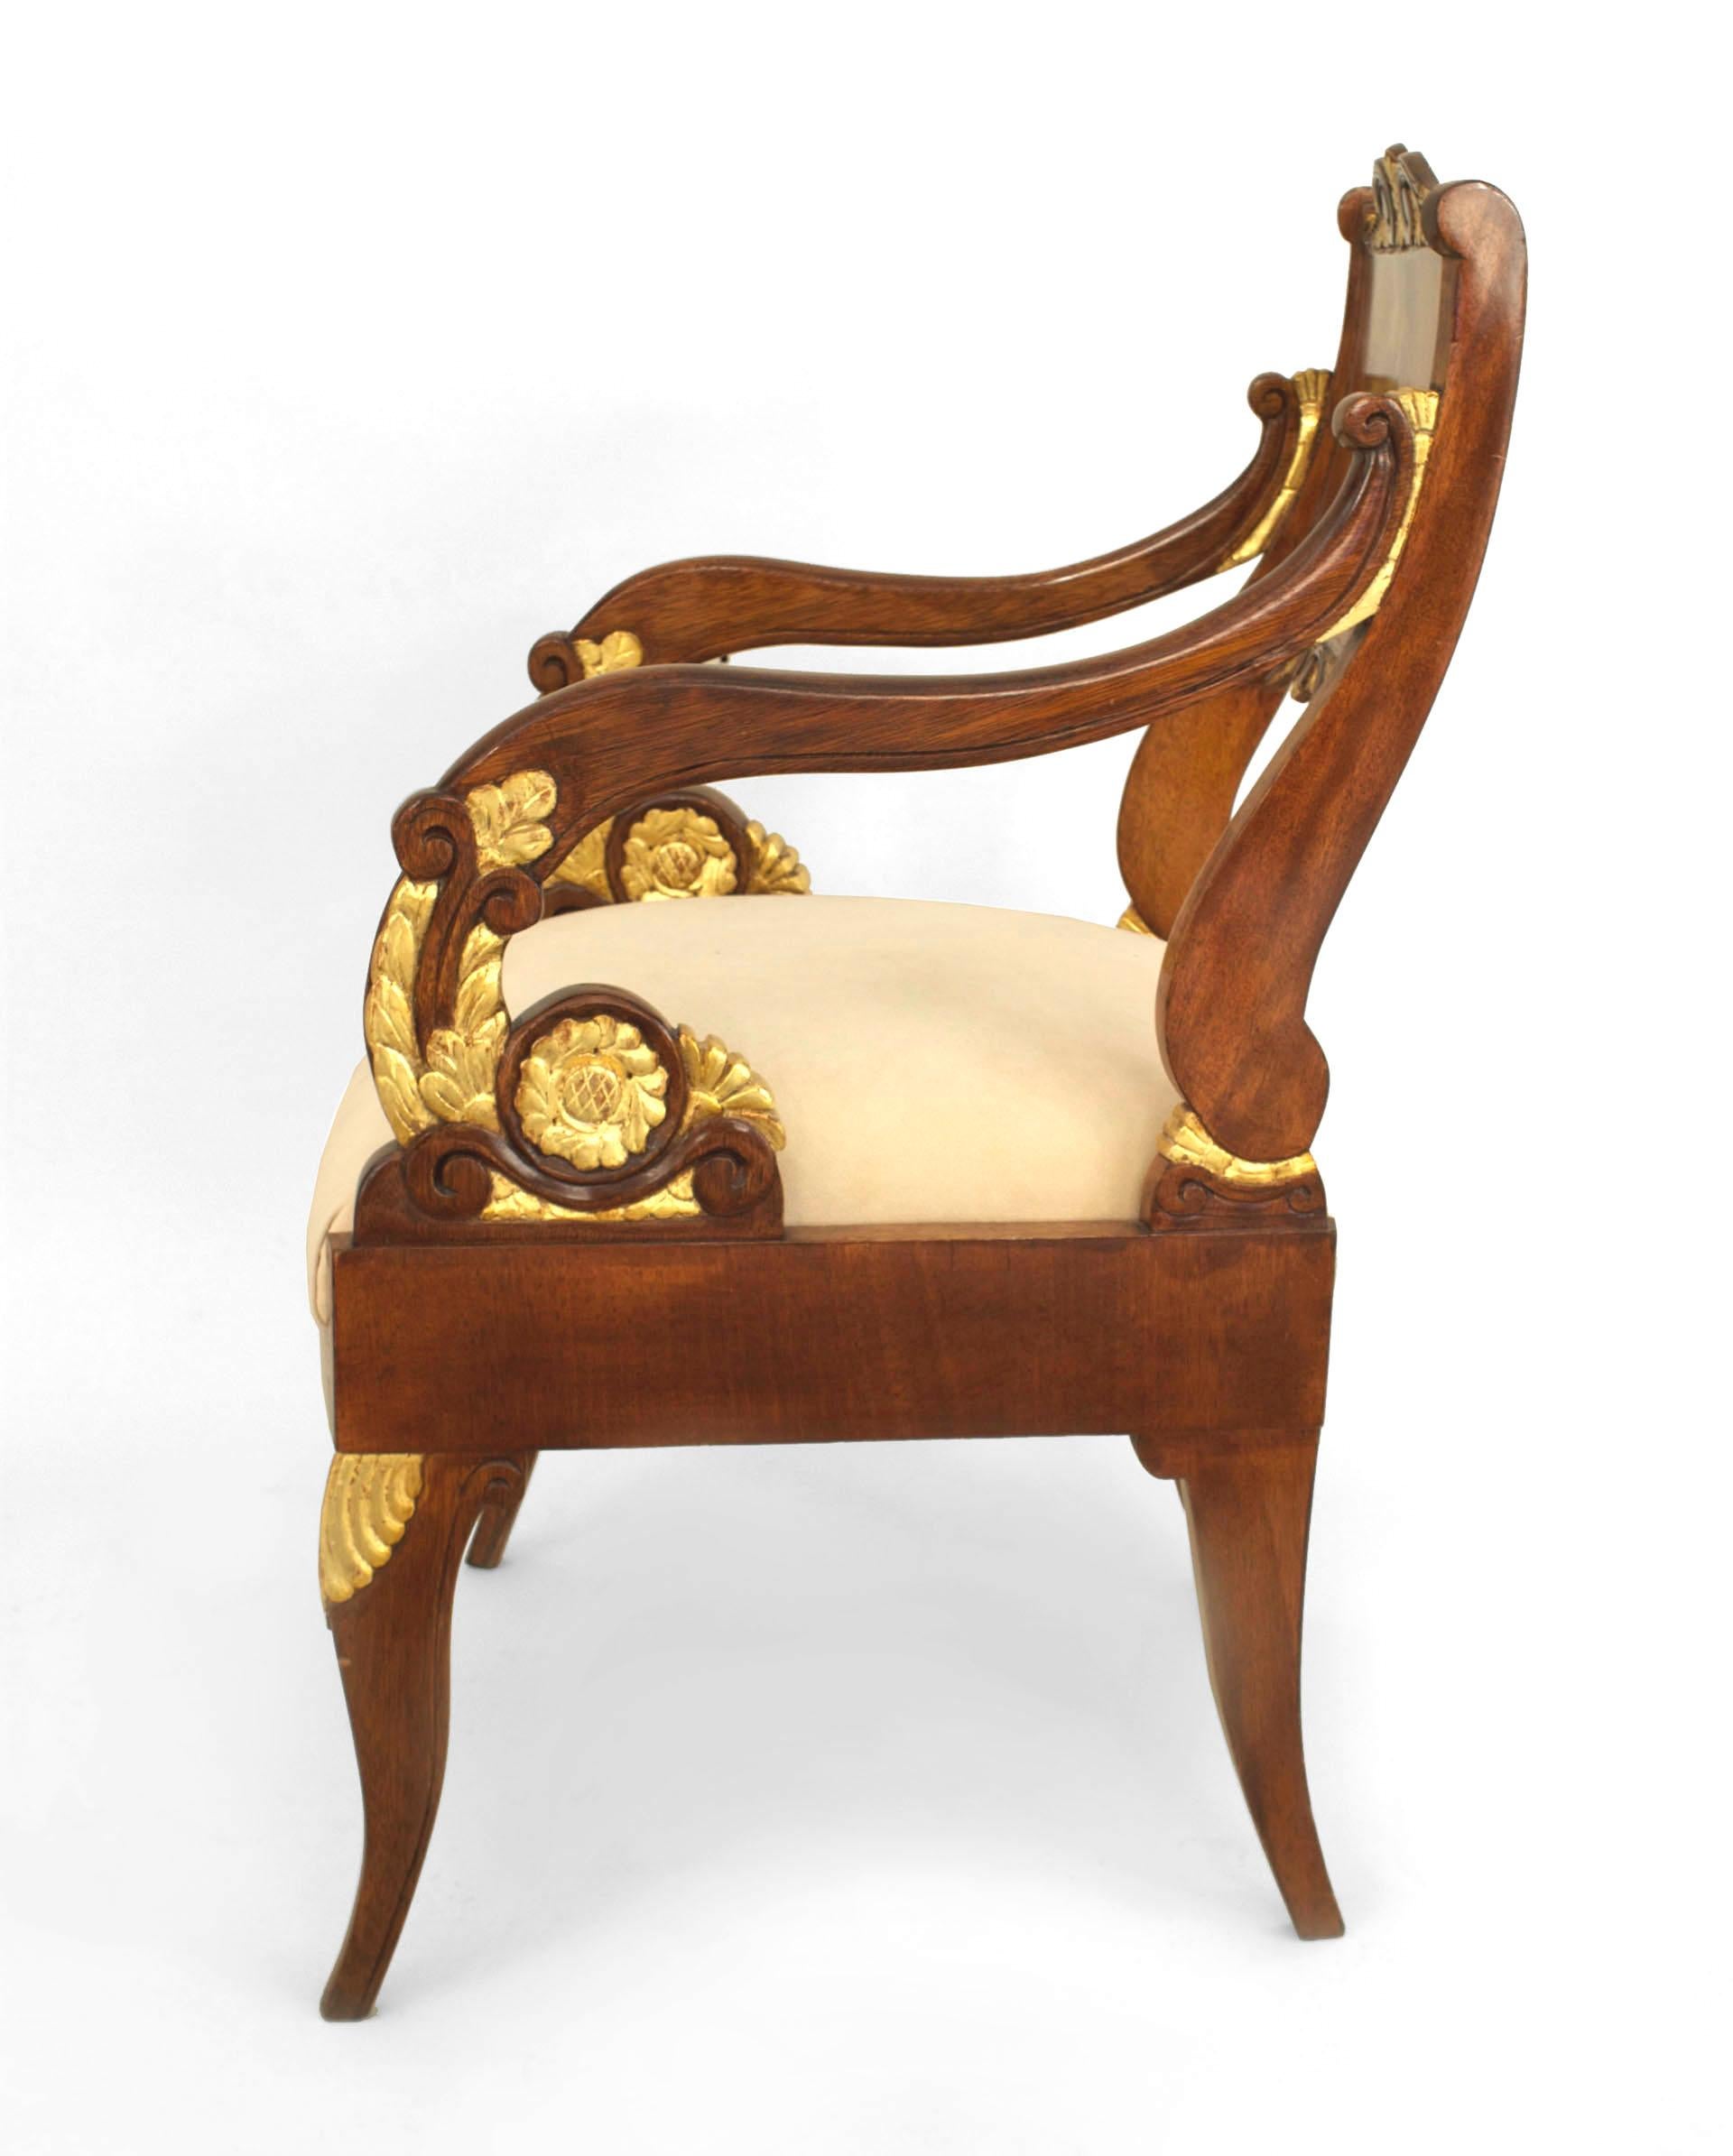 Pair of Russian (19th Cent) mahogany open scroll design Armchairs with gilt carved trim on back and arms and an upholstered seat
